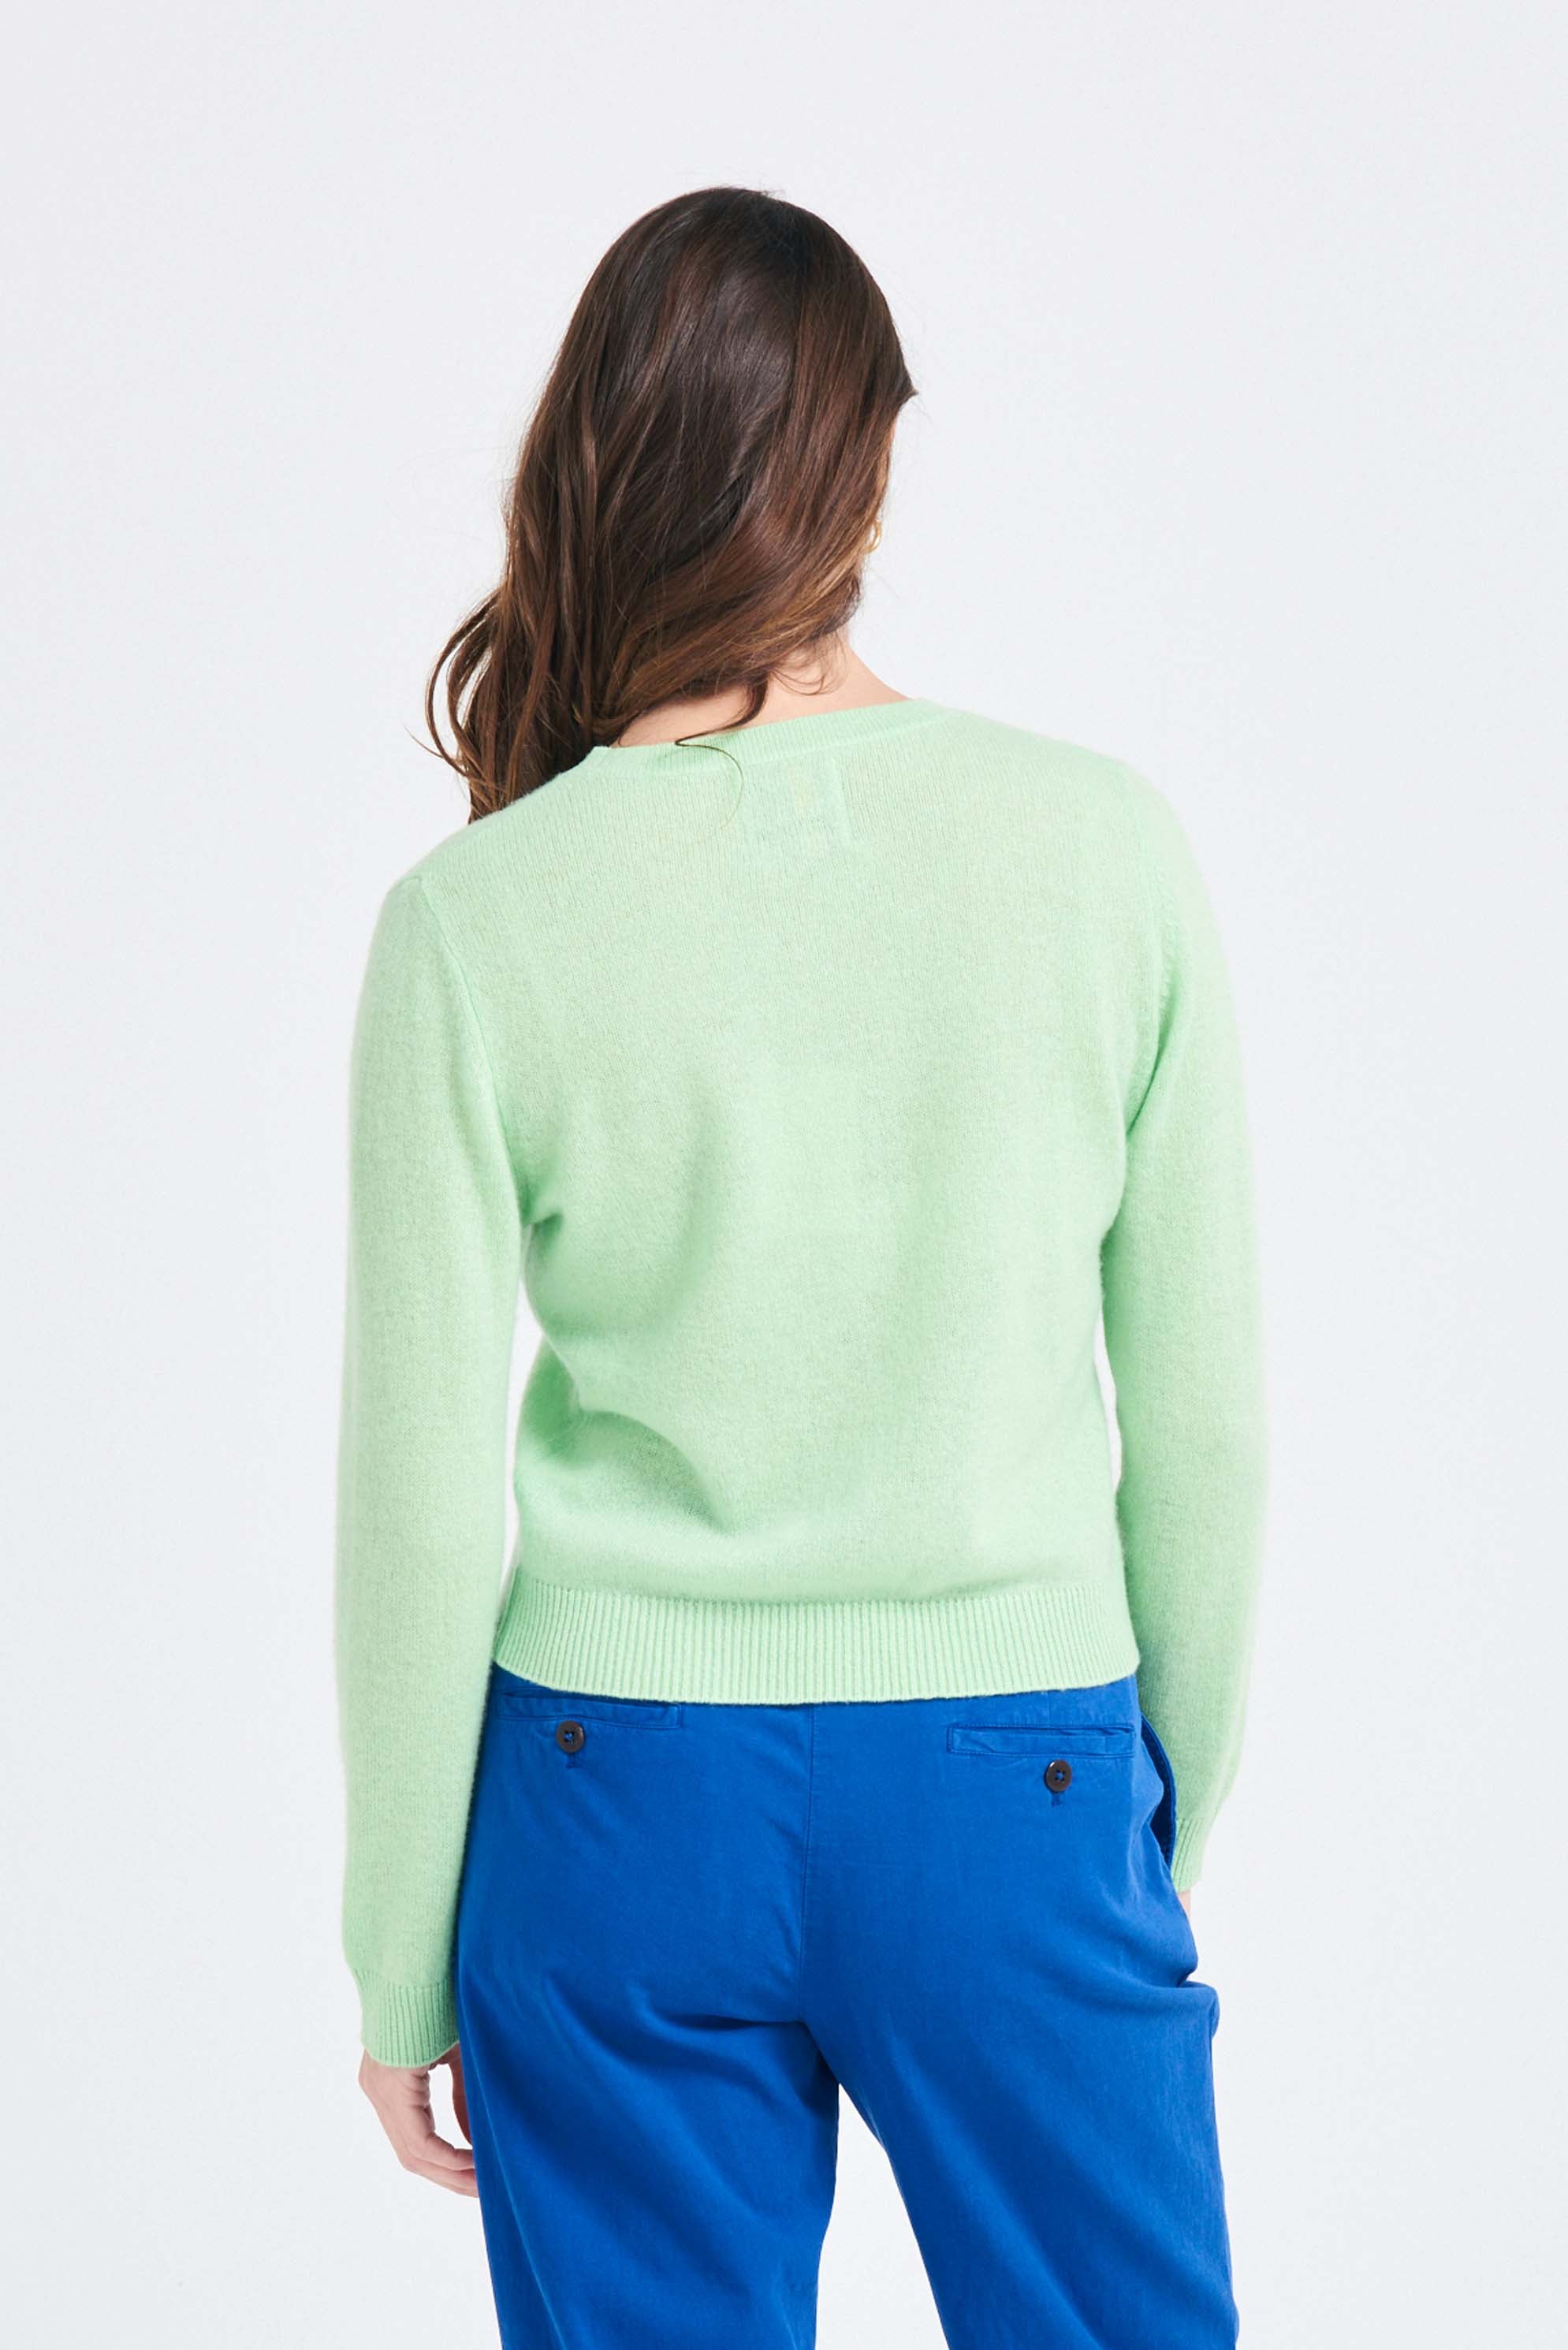 Brown haired female model wearing Jumper1234 Lime green lighter weight crew neck cashmere jumper facing away from the camera